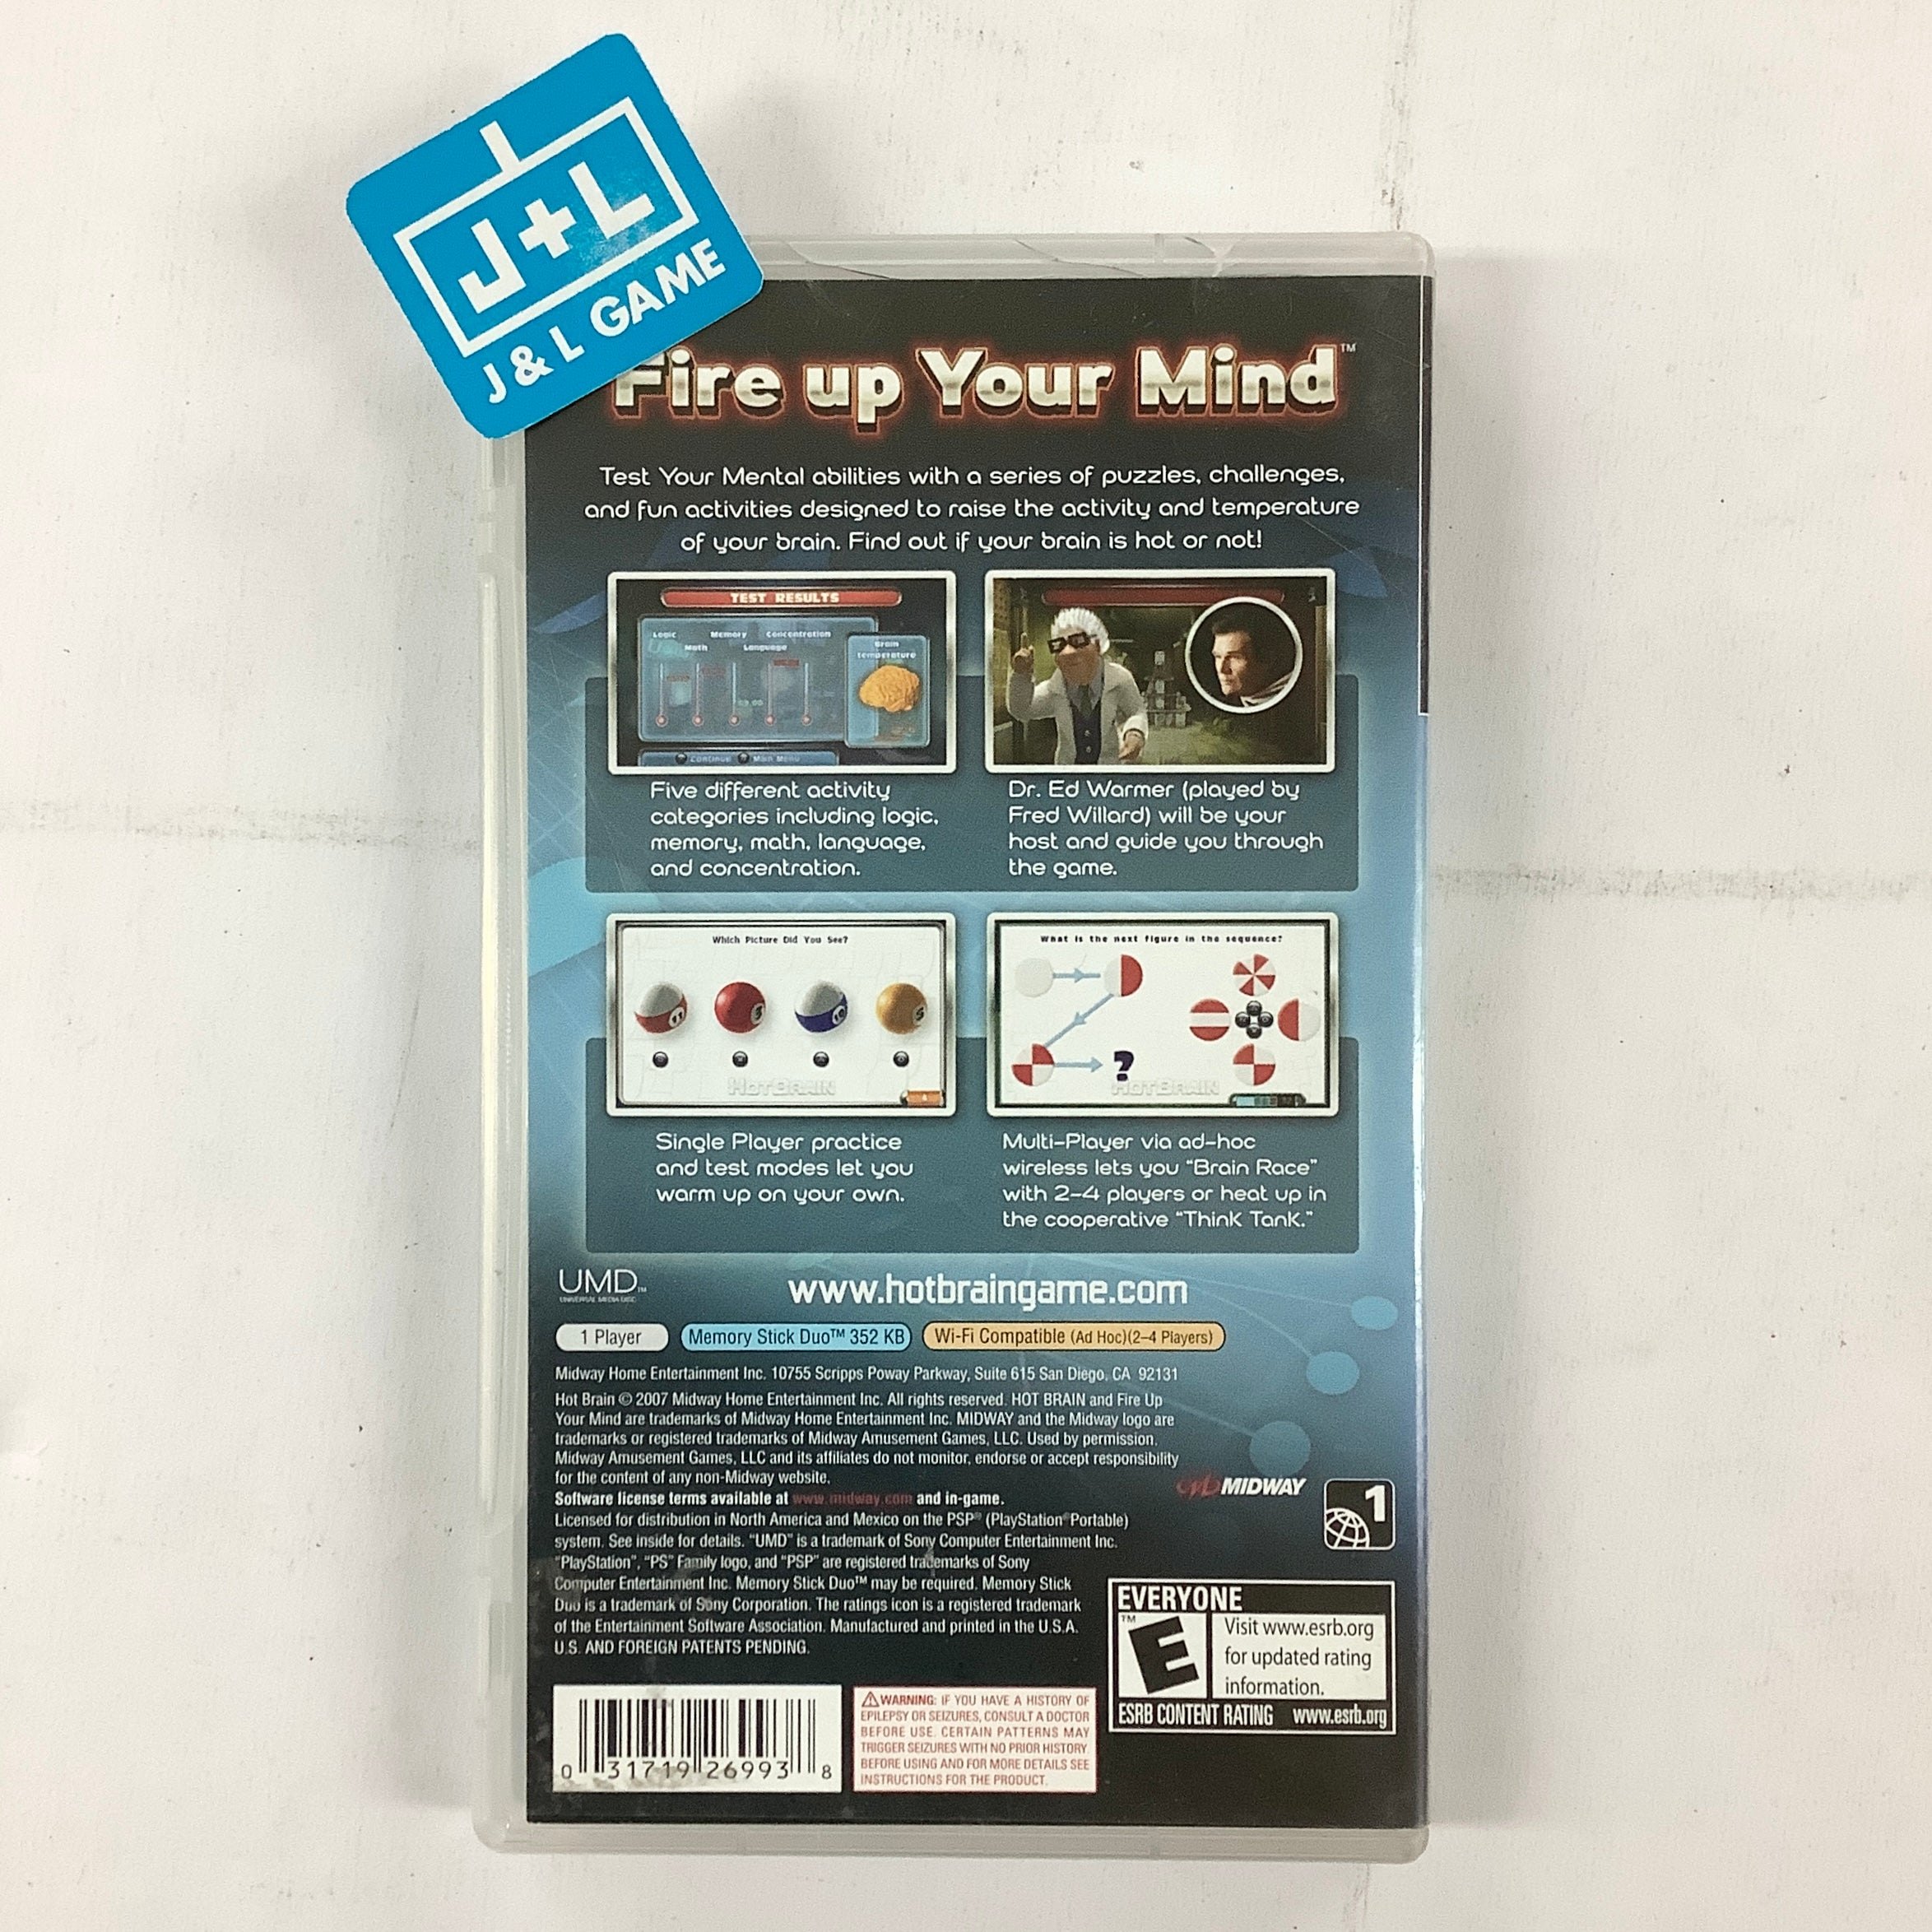 Hot Brain - Sony PSP [Pre-Owned] Video Games Midway   